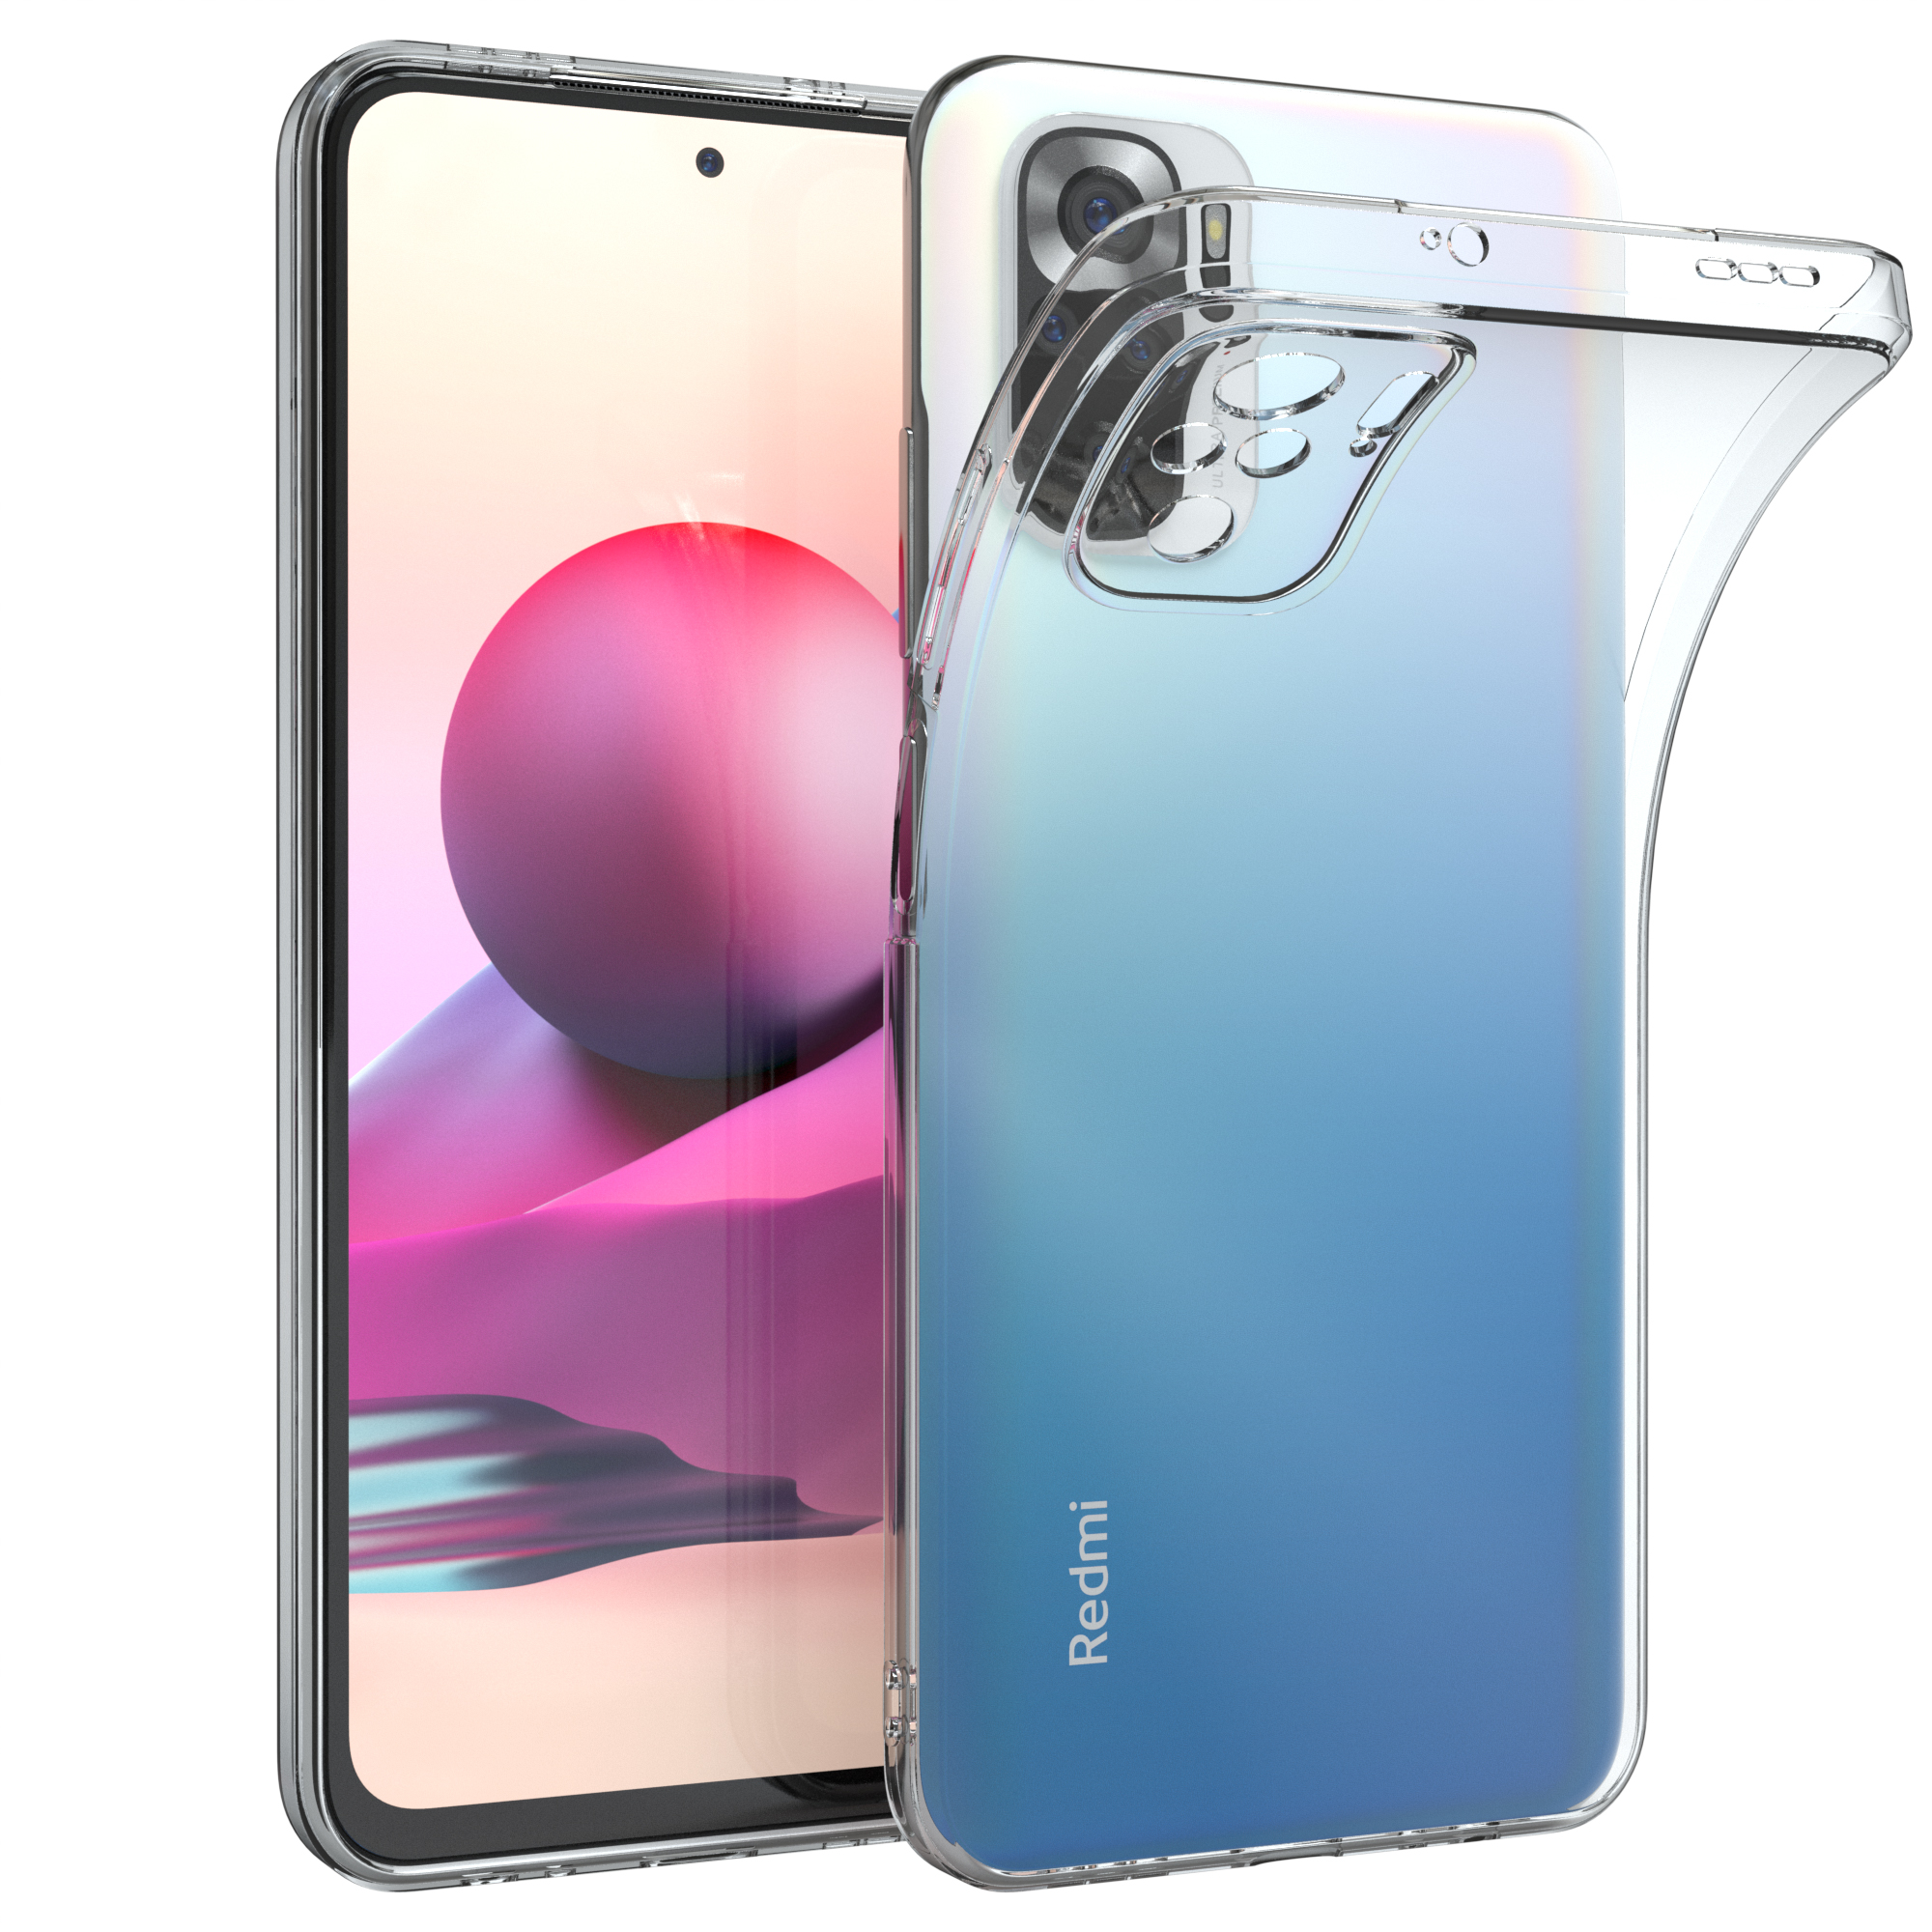 EAZY CASE Xiaomi, Slimcover Redmi Durchsichtig 10S, / Backcover, Note 10 Clear